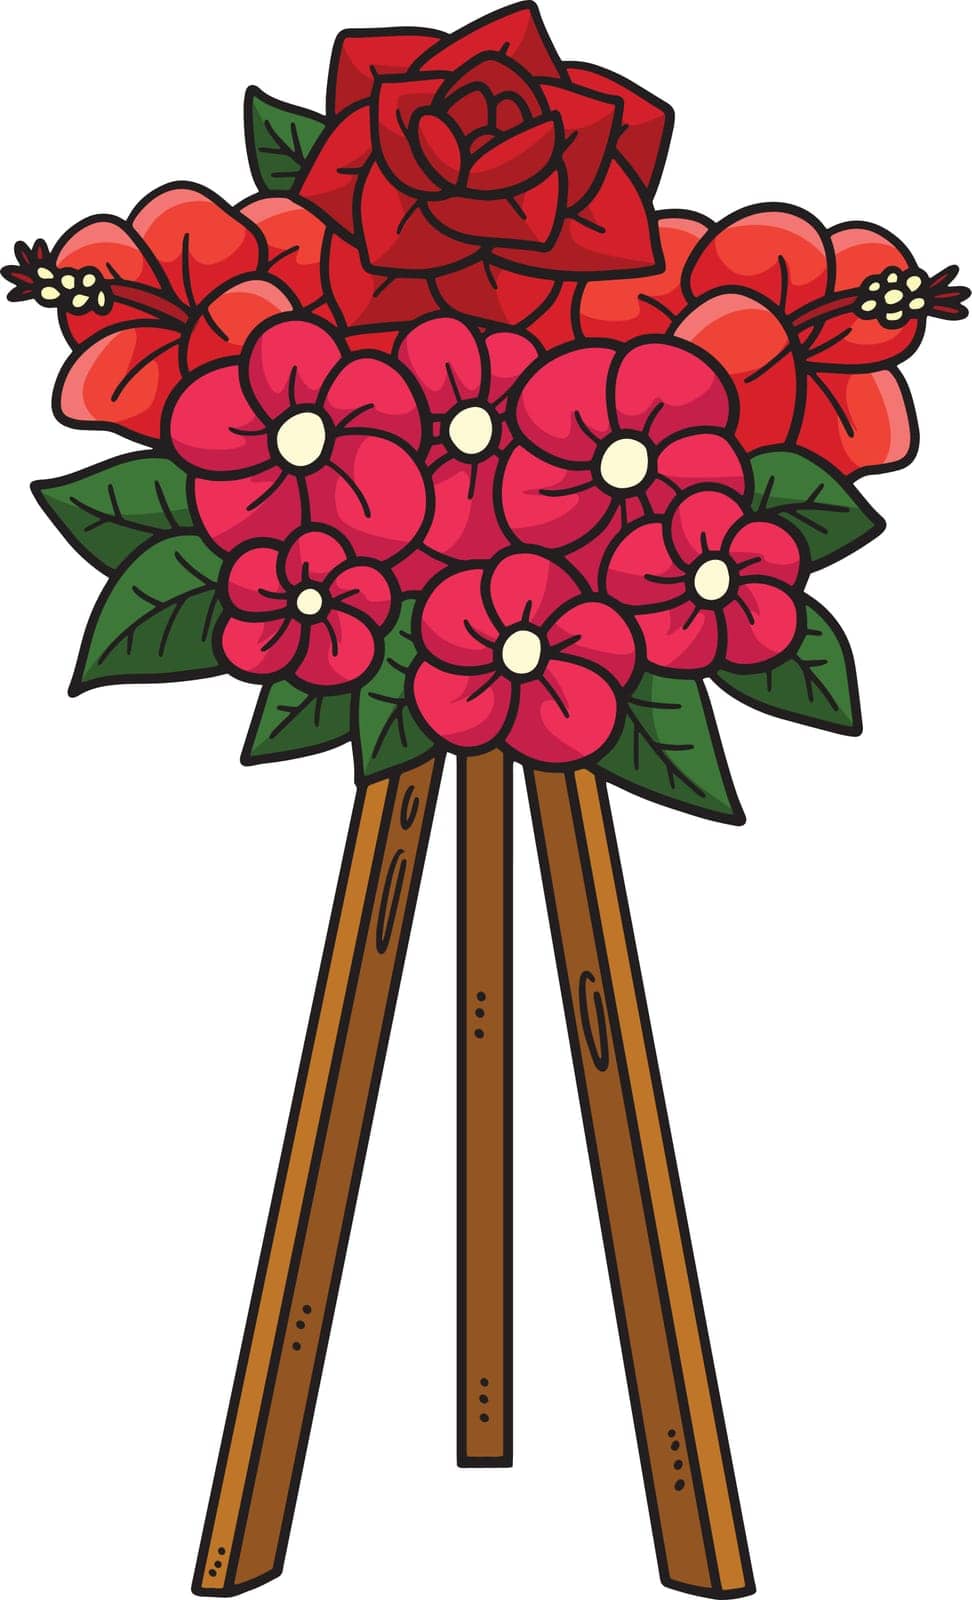 Flower Standee Cartoon Colored Clipart by abbydesign